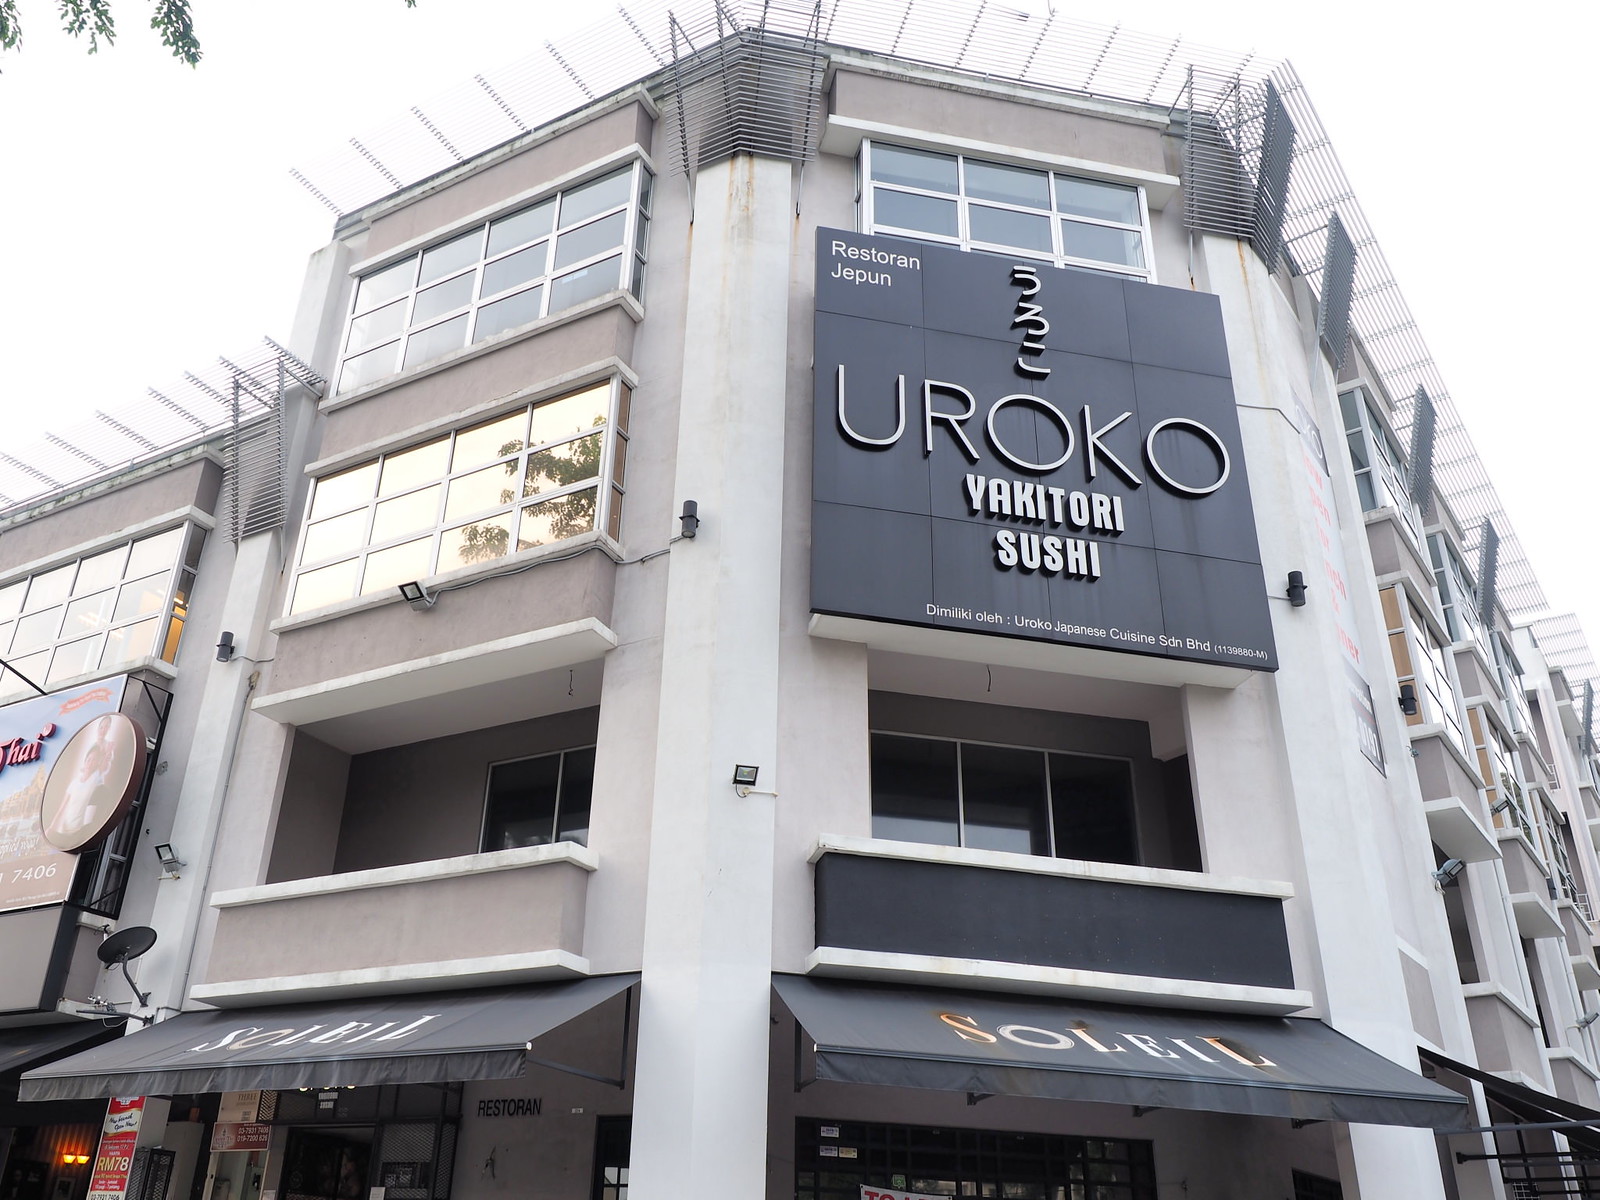 The view of Uroko Japanese Cuisine at Section 17, Petaling Jaya from outside